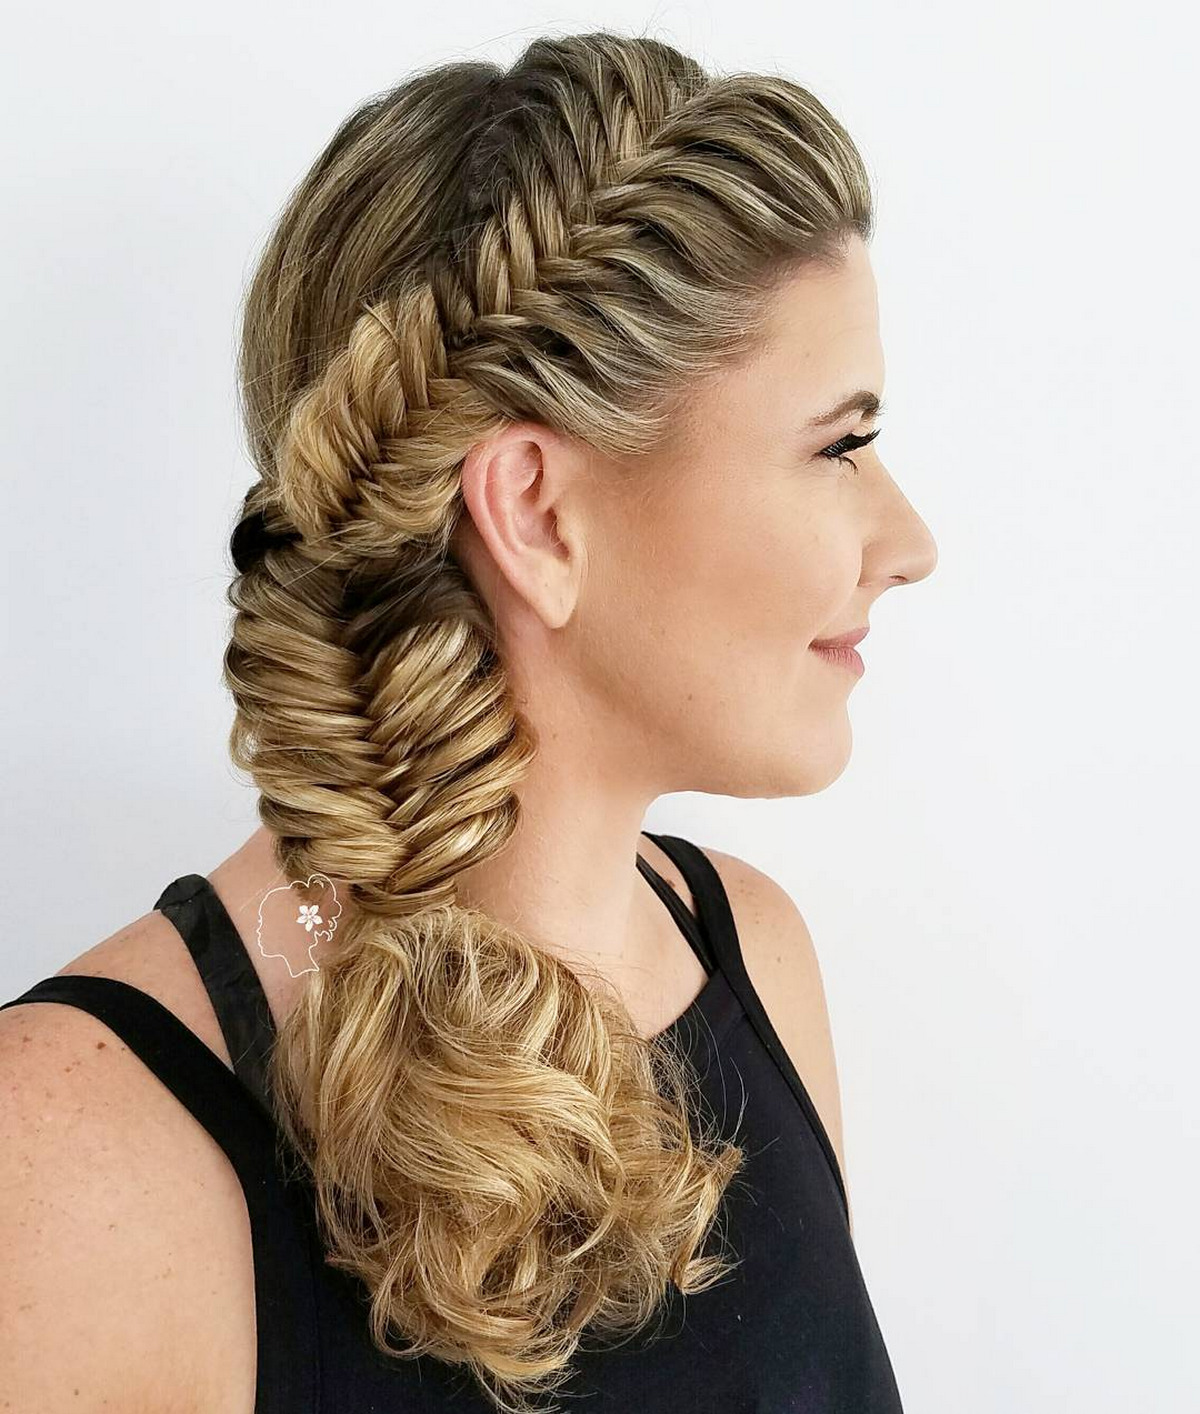 Side Fishtail Braid For Frizzy Hair